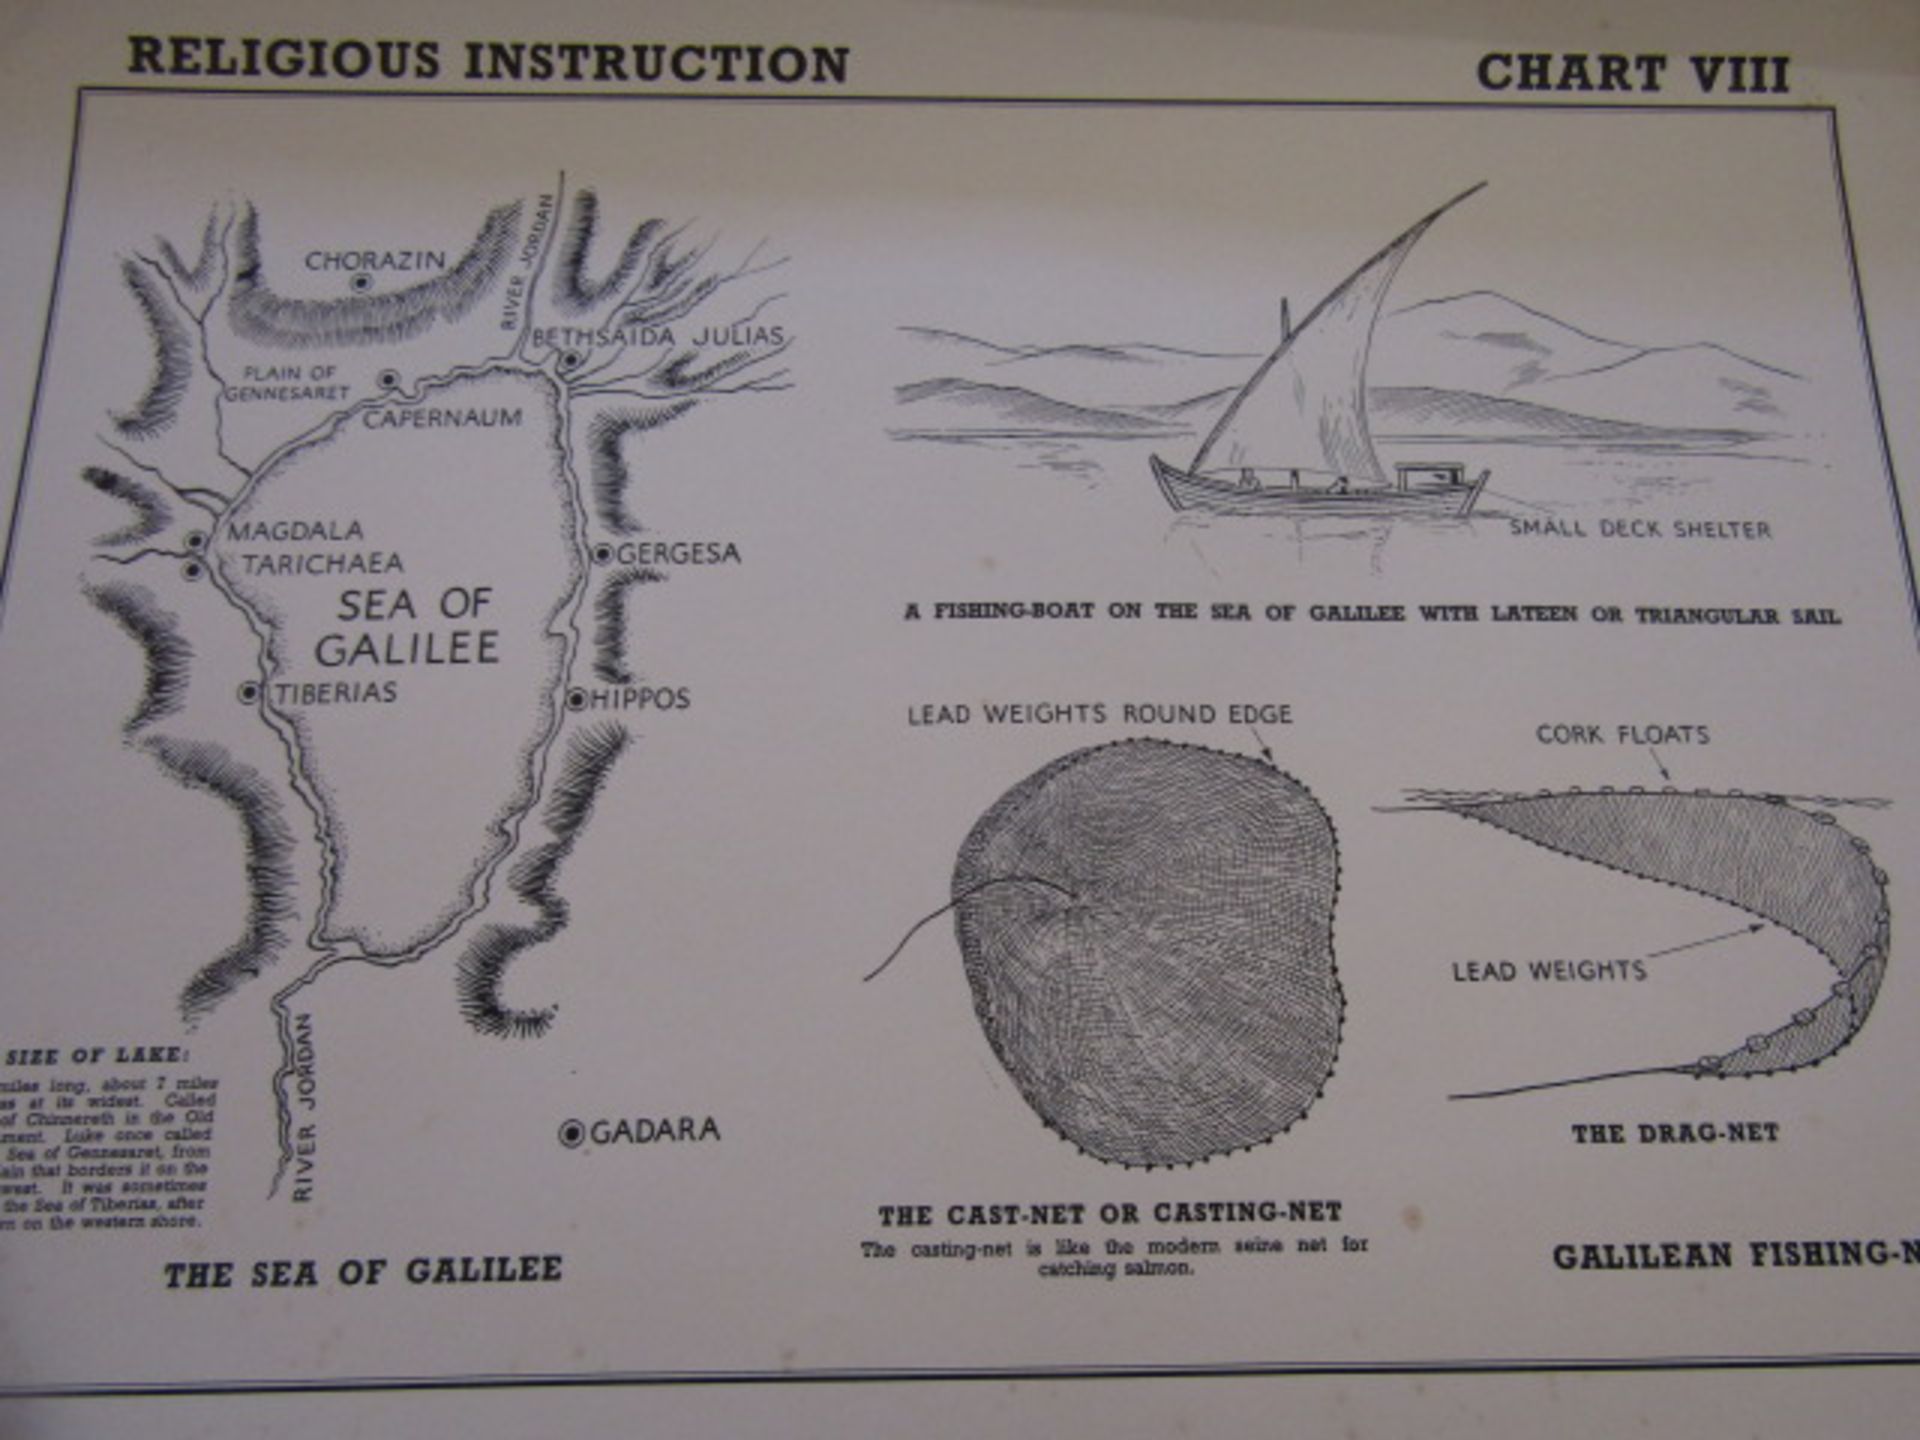 Vintage education prints History Viking ships  (15) Religious Instruction - 8 charts and 3 maps an - Image 30 of 32